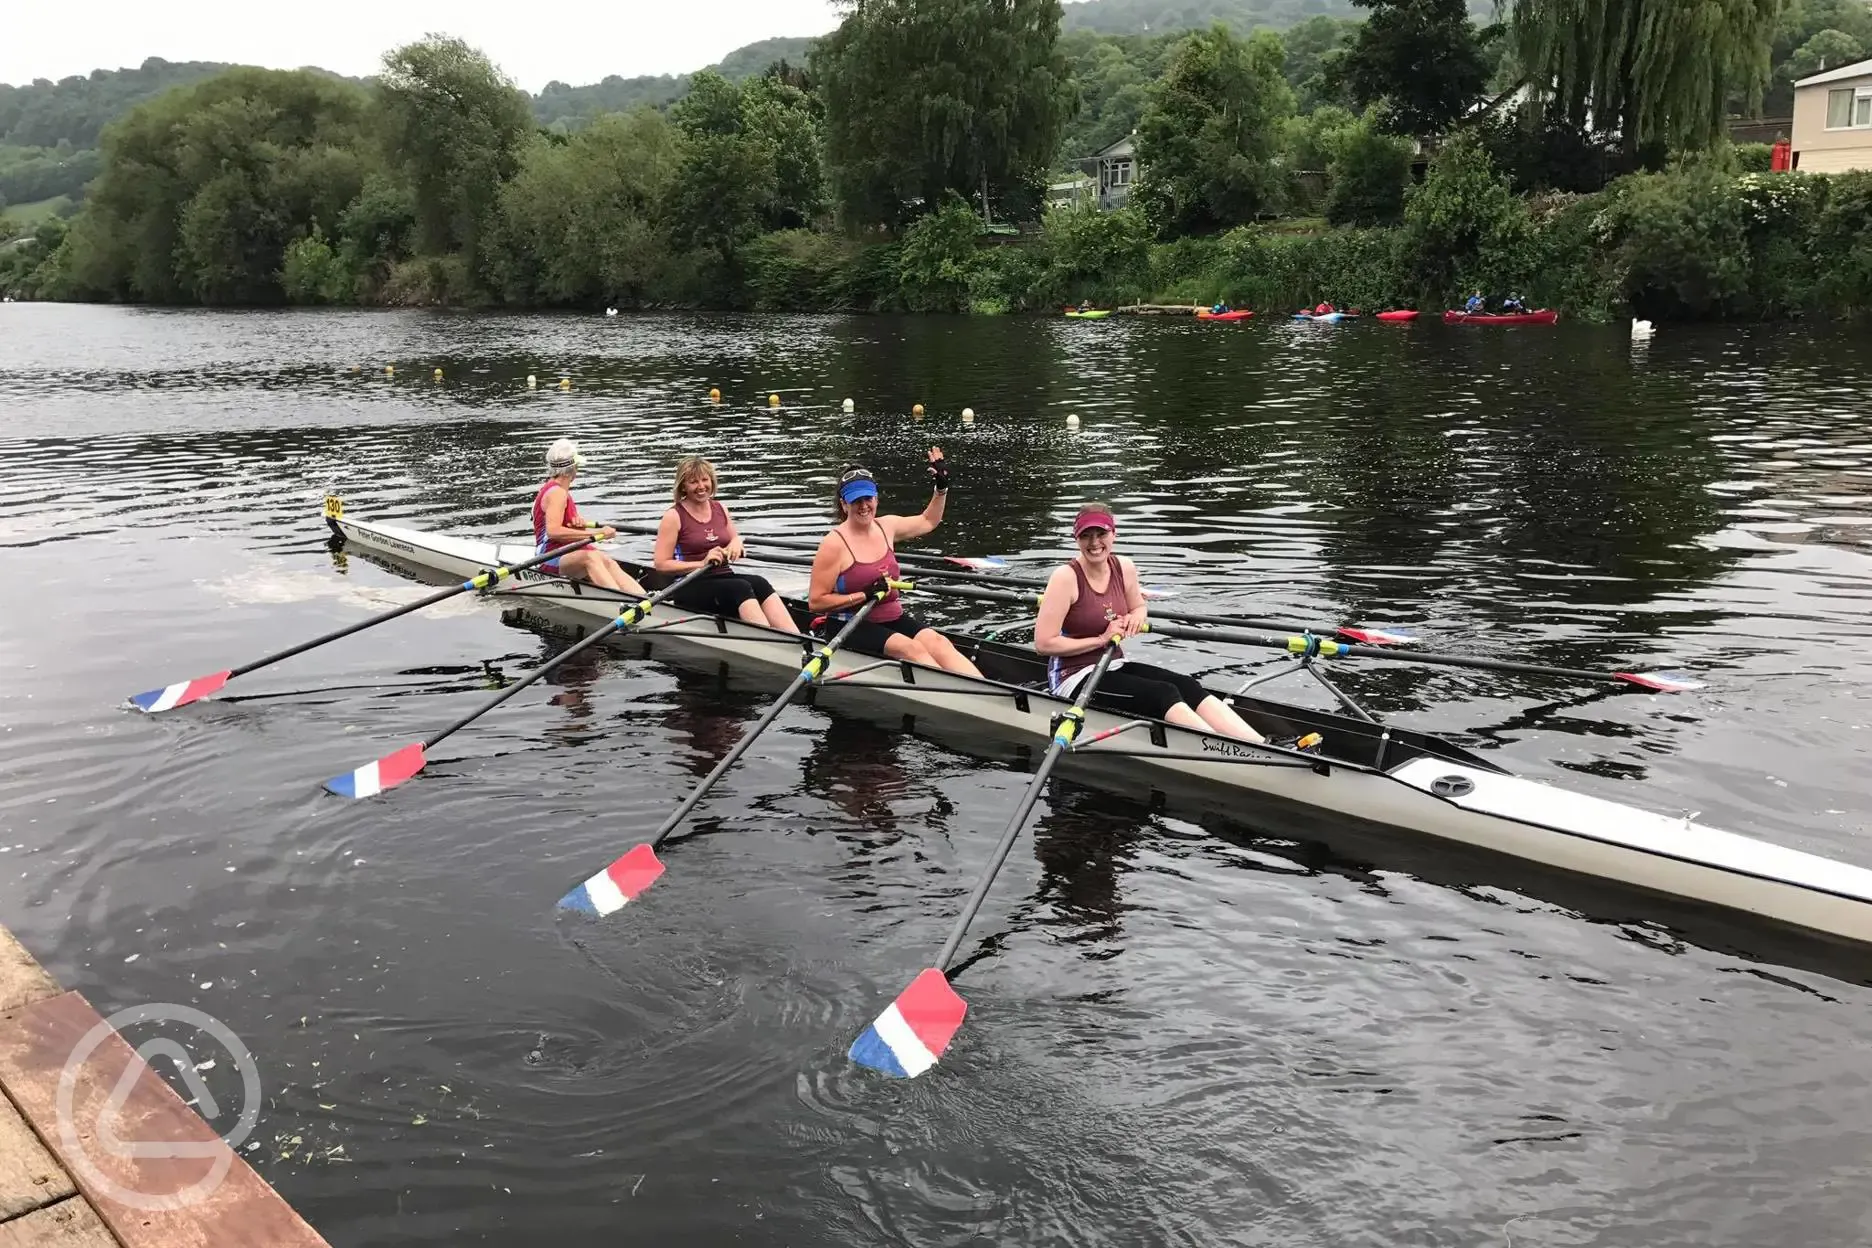 Rowers at the RRC on the Wye